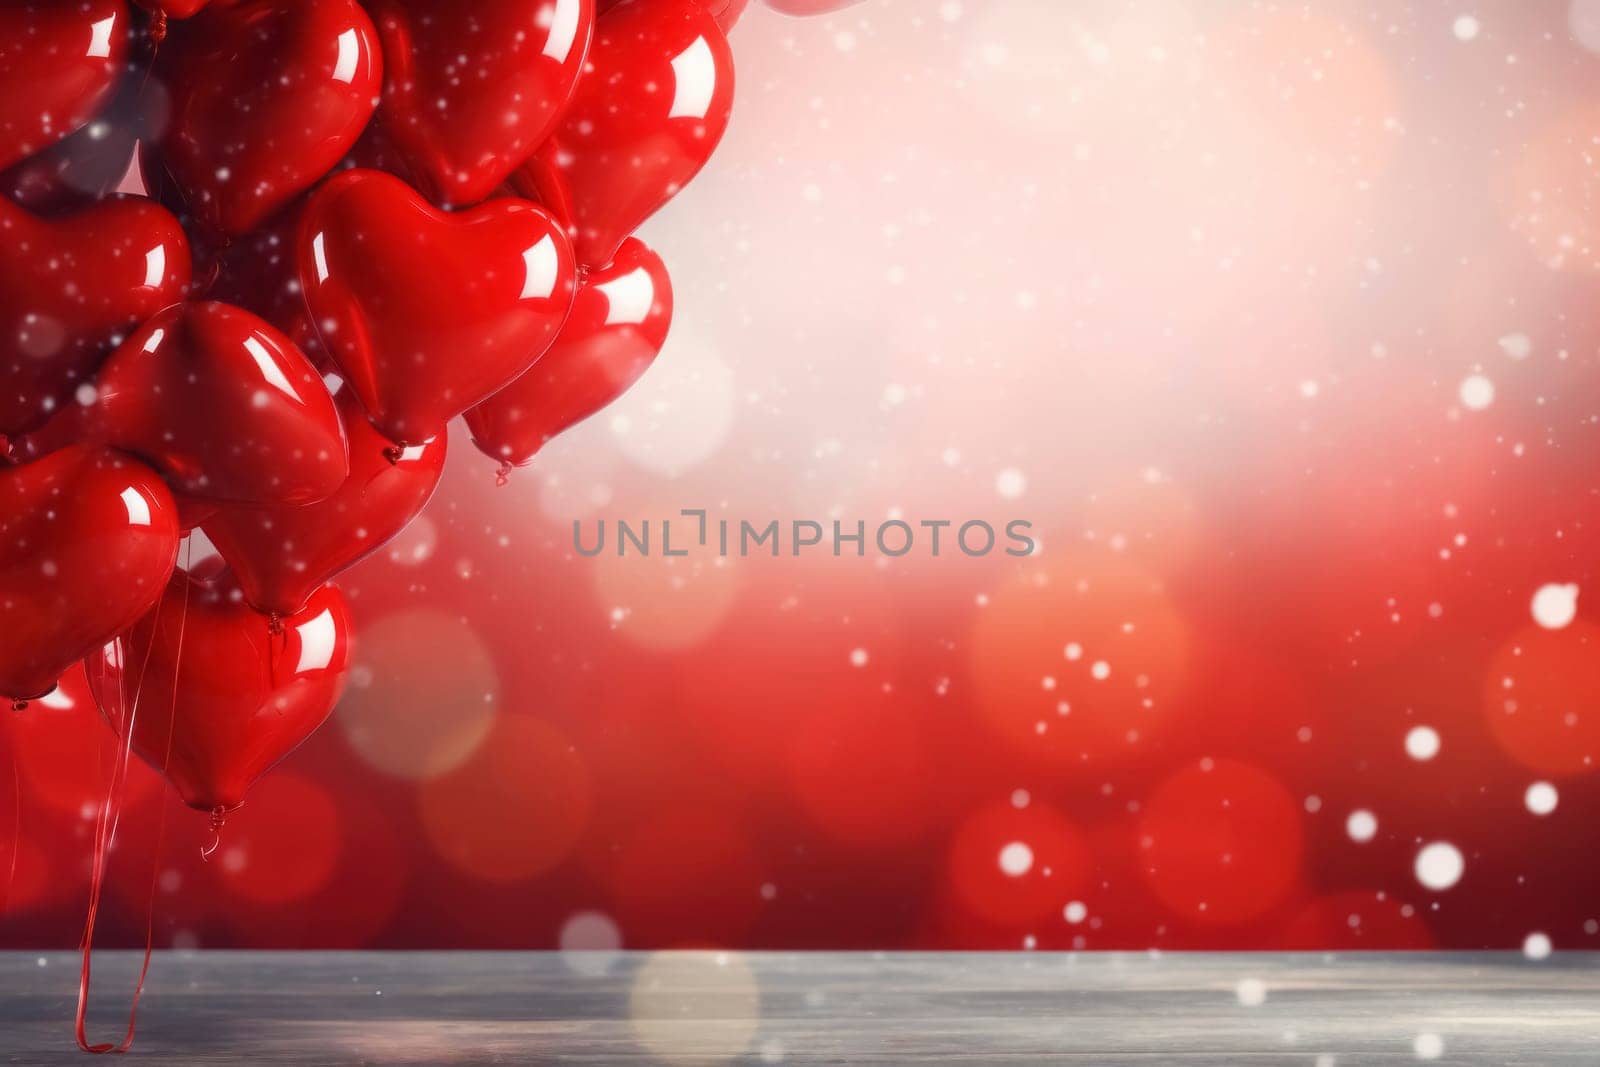 Vibrant red heart balloons bunched together, with a sparkling red festive background suggestive of celebrations.